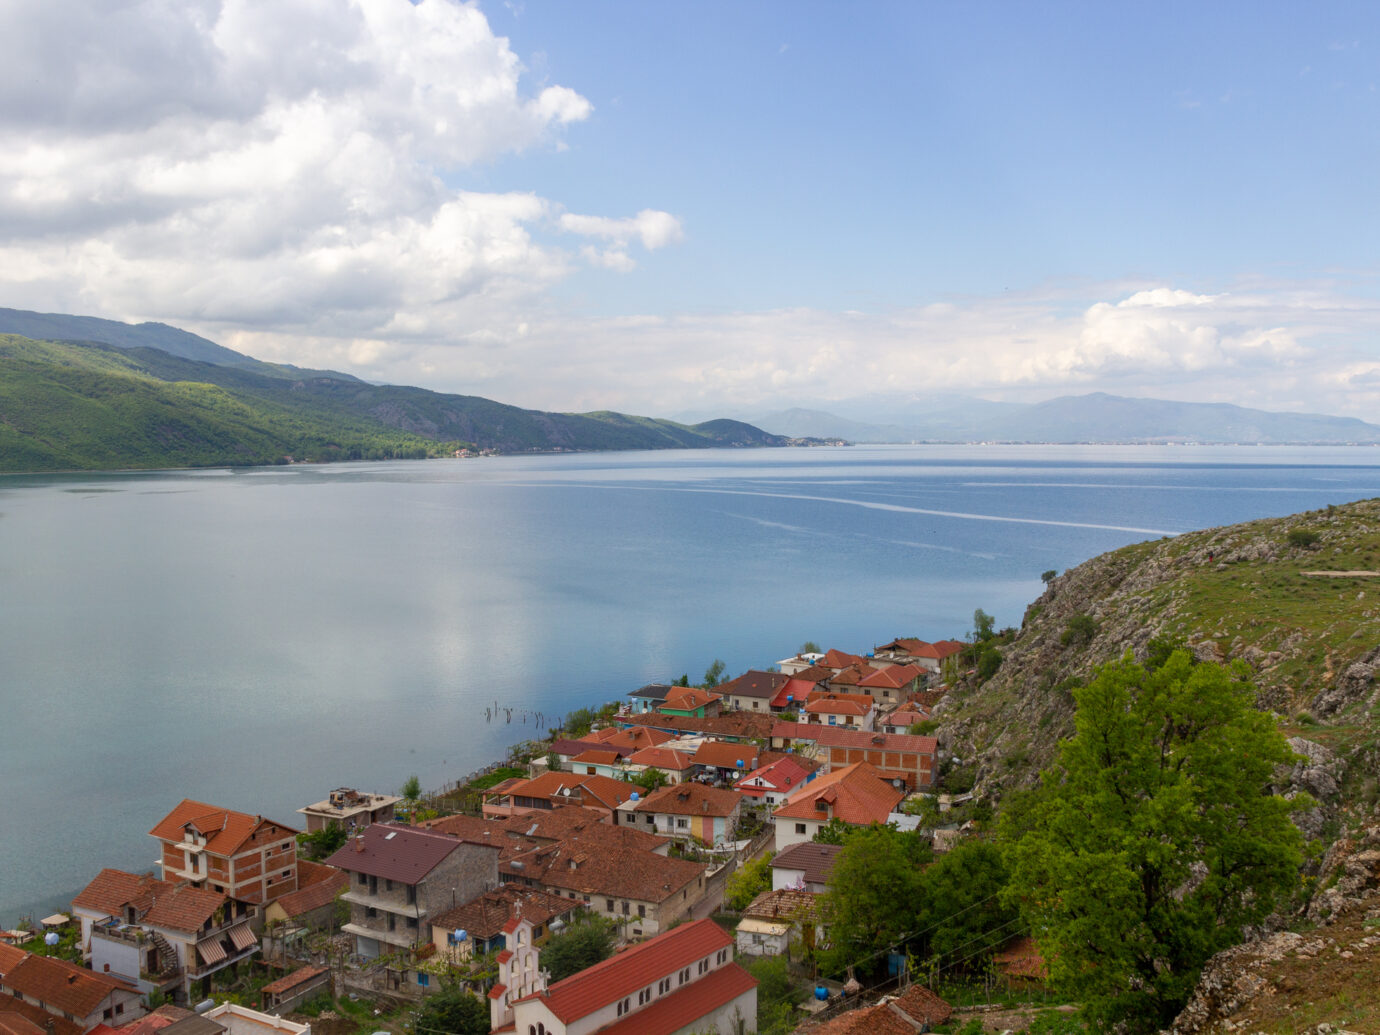 The Lake Ohrid photo taken from Albania near the border with Macedonia. Very clean and blue lake